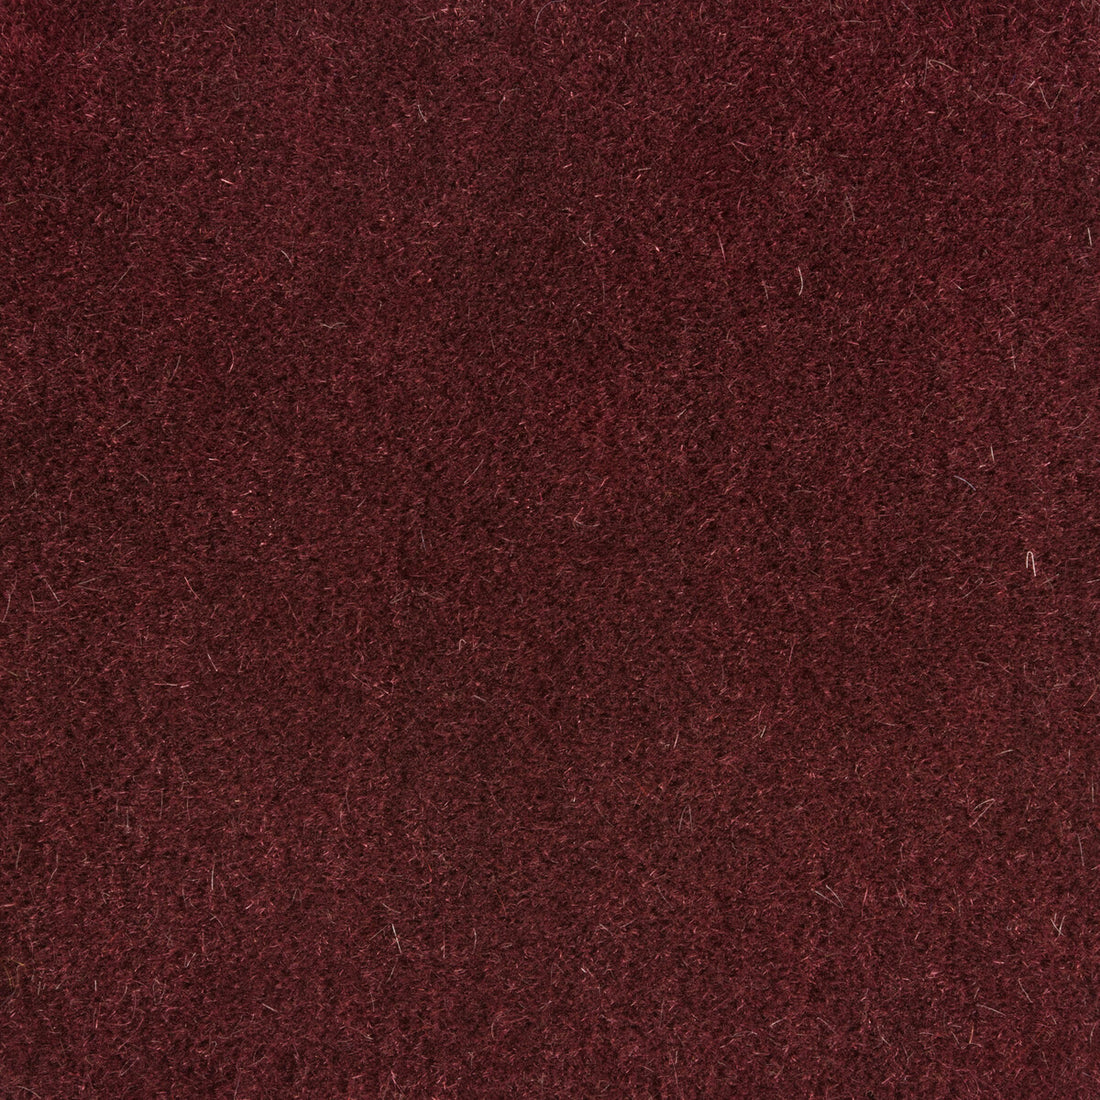 Bachelor Mohair fabric in damson color - pattern 8014101.1010.0 - by Brunschwig &amp; Fils